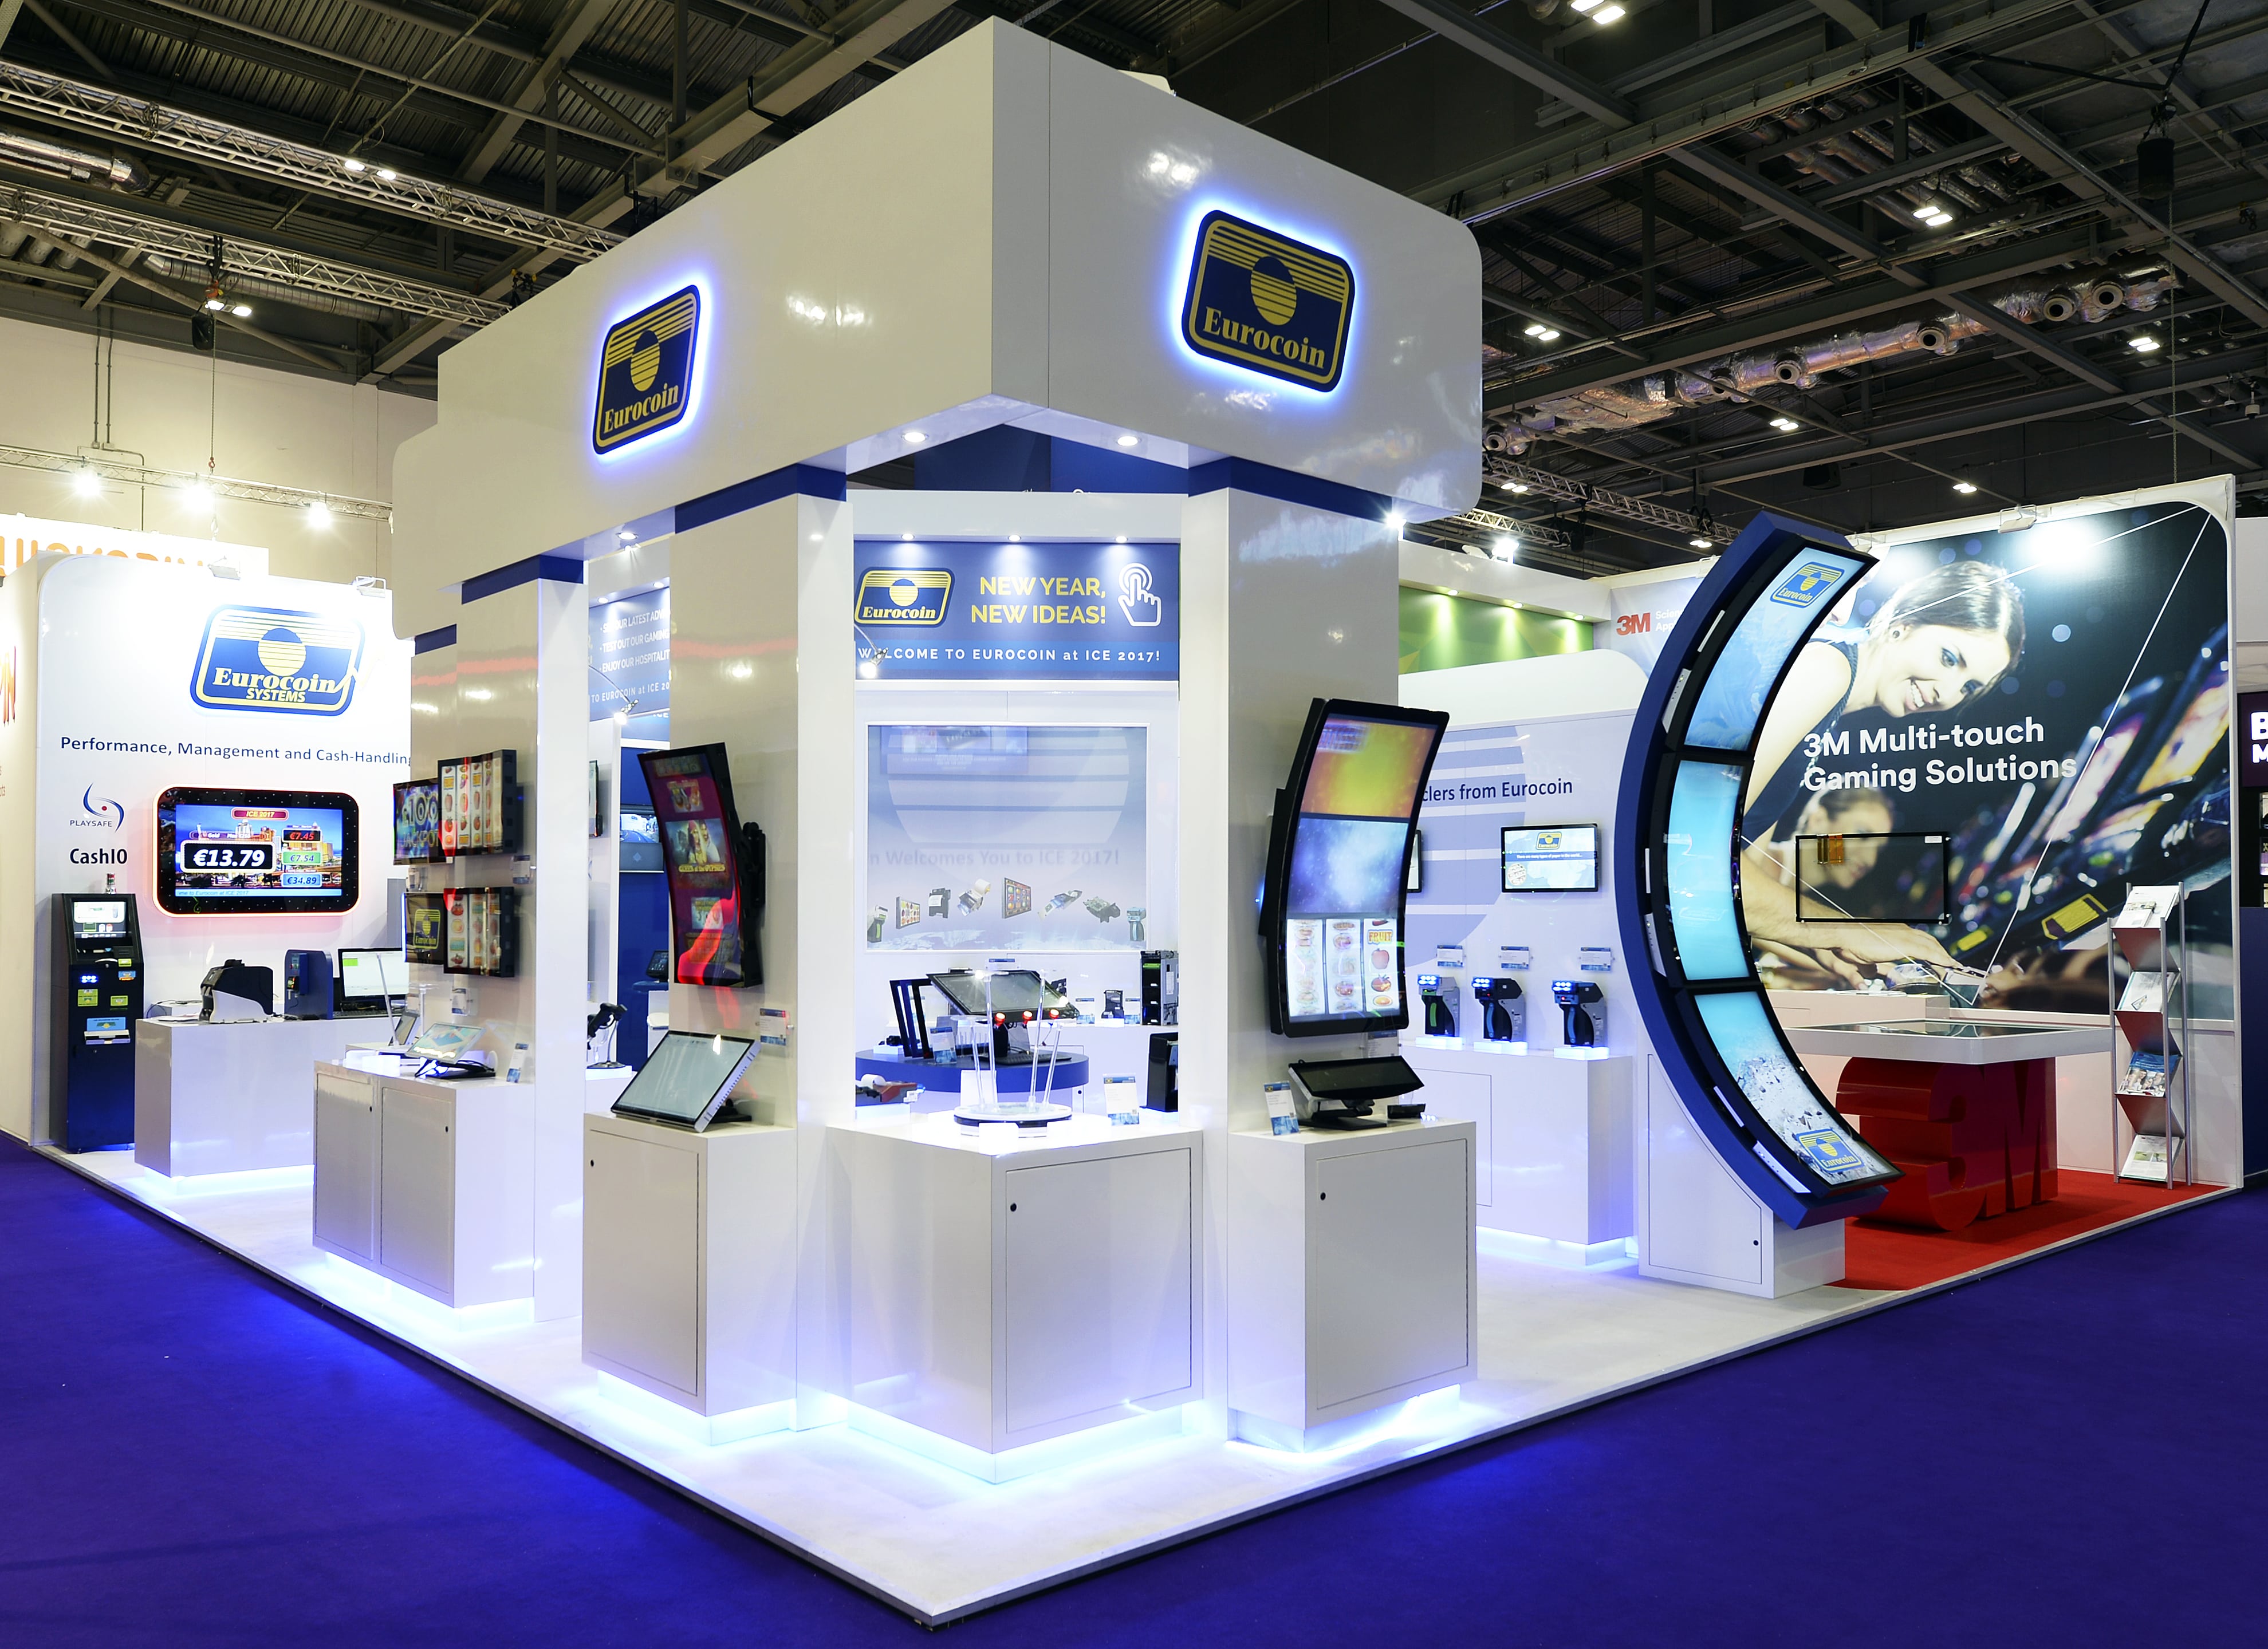 Exhibition stands from around the world | Displays2Go Blog